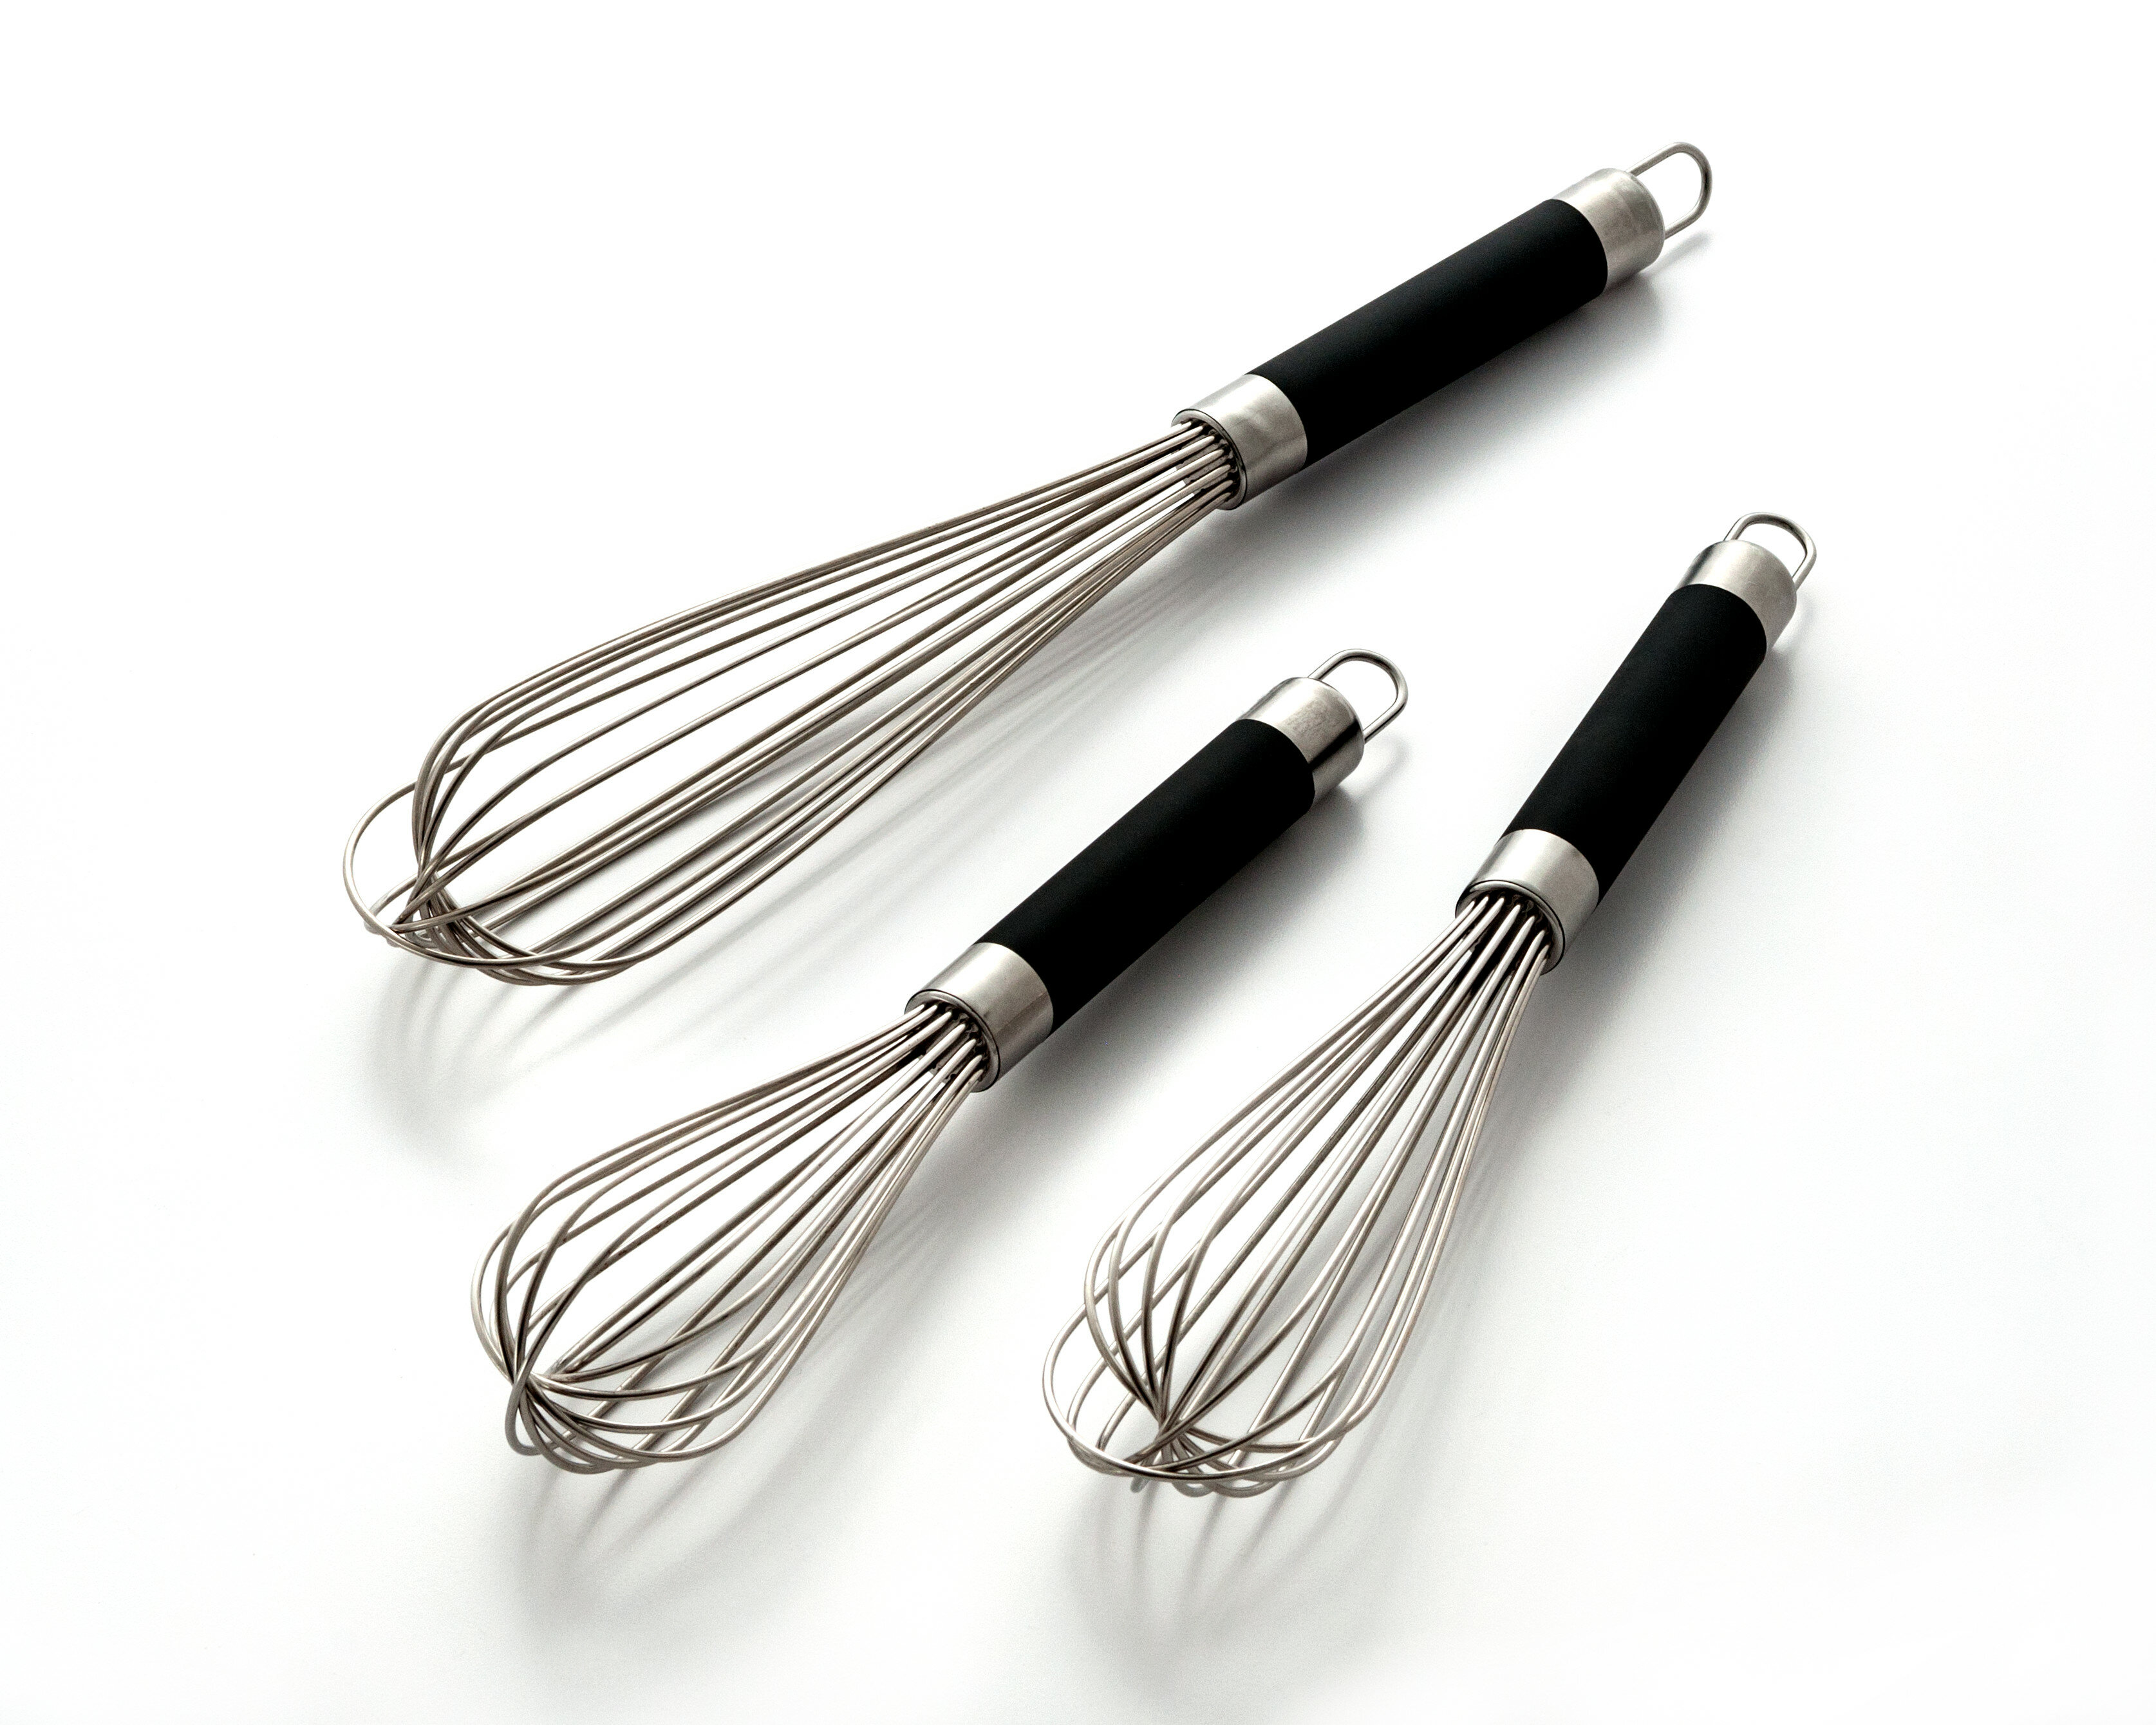 Cook Pro Professional Whisk & Reviews